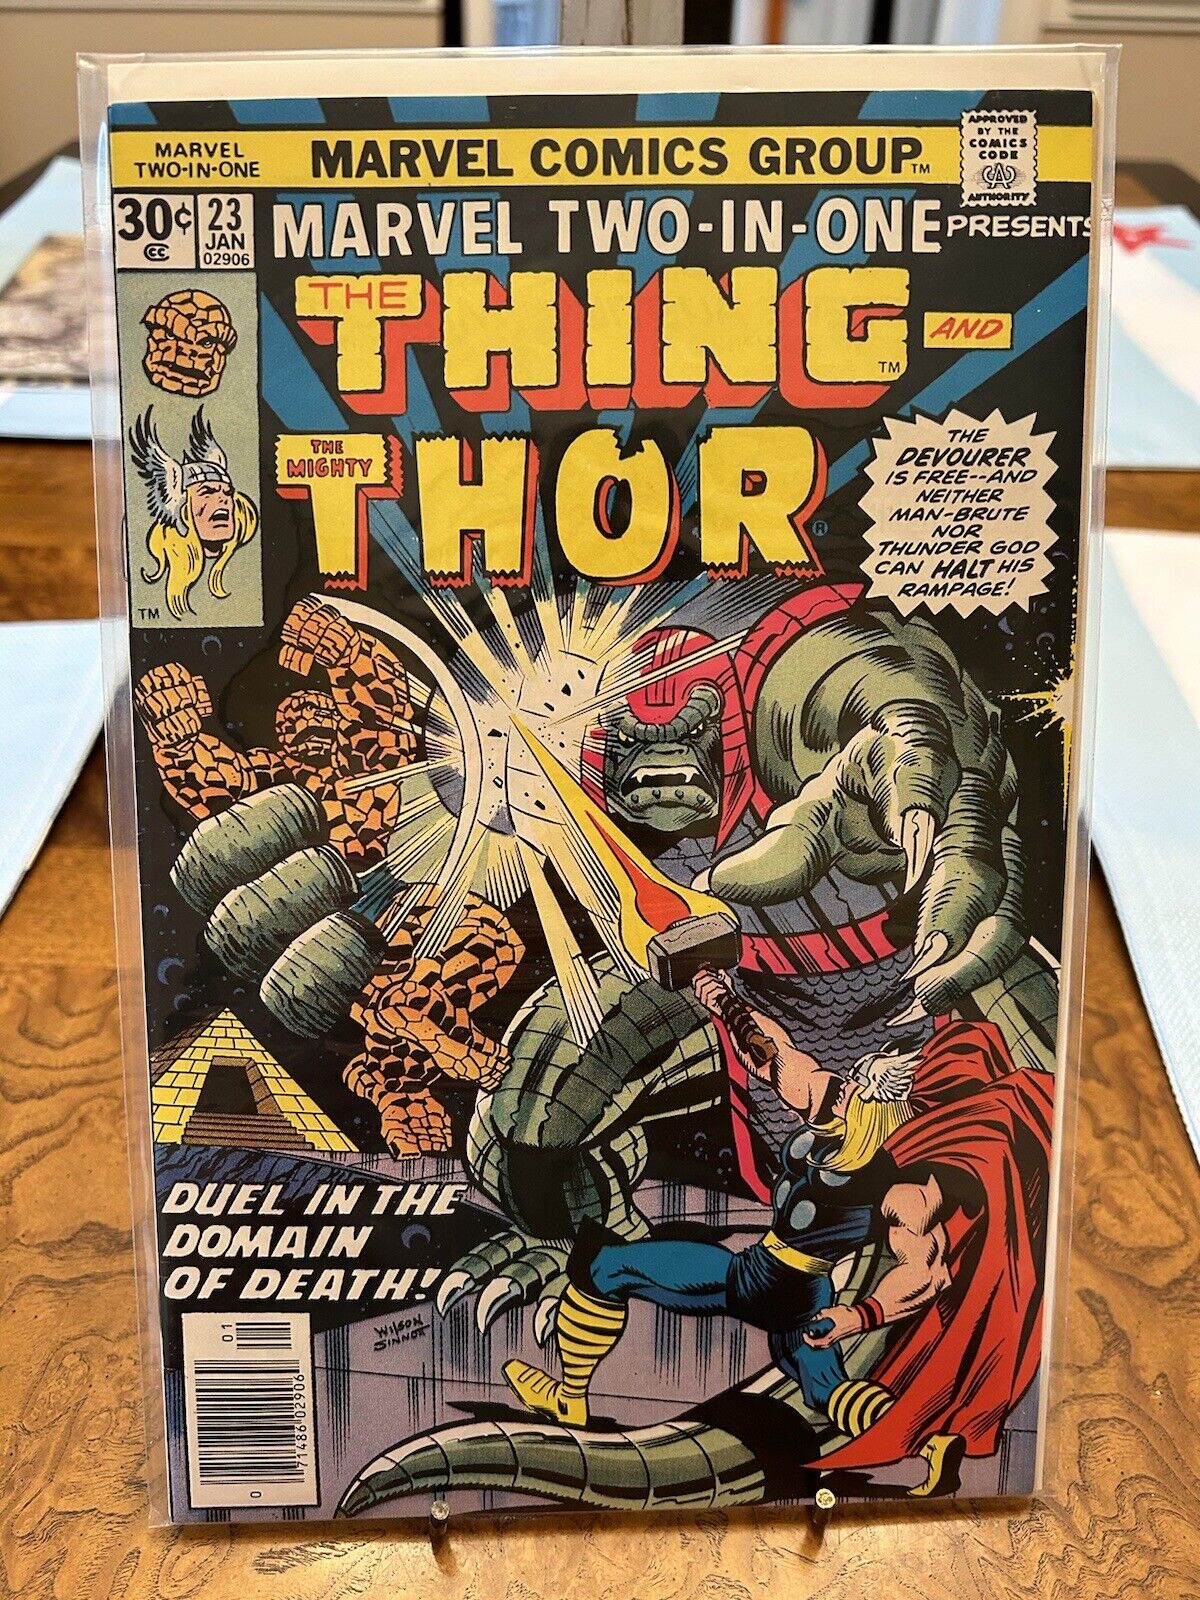 Marvel Two-in-One #23 (Marvel Comics January 1977)